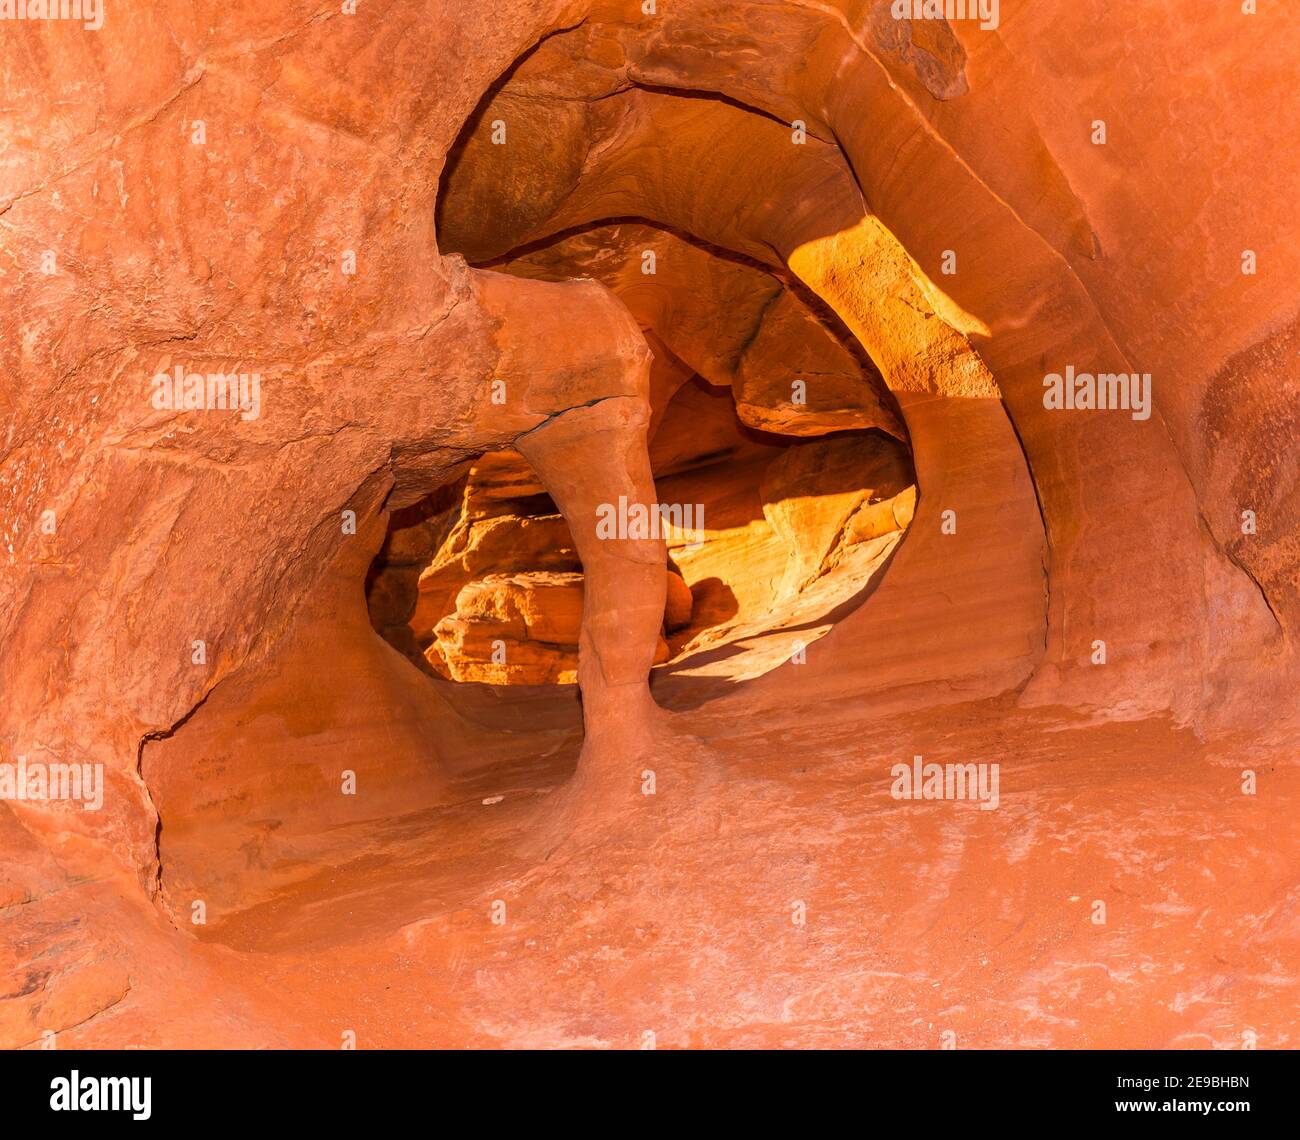 Fire Cave aka Windstone Arch, Valley of Fire State Park, Nevada, USA Stockfoto